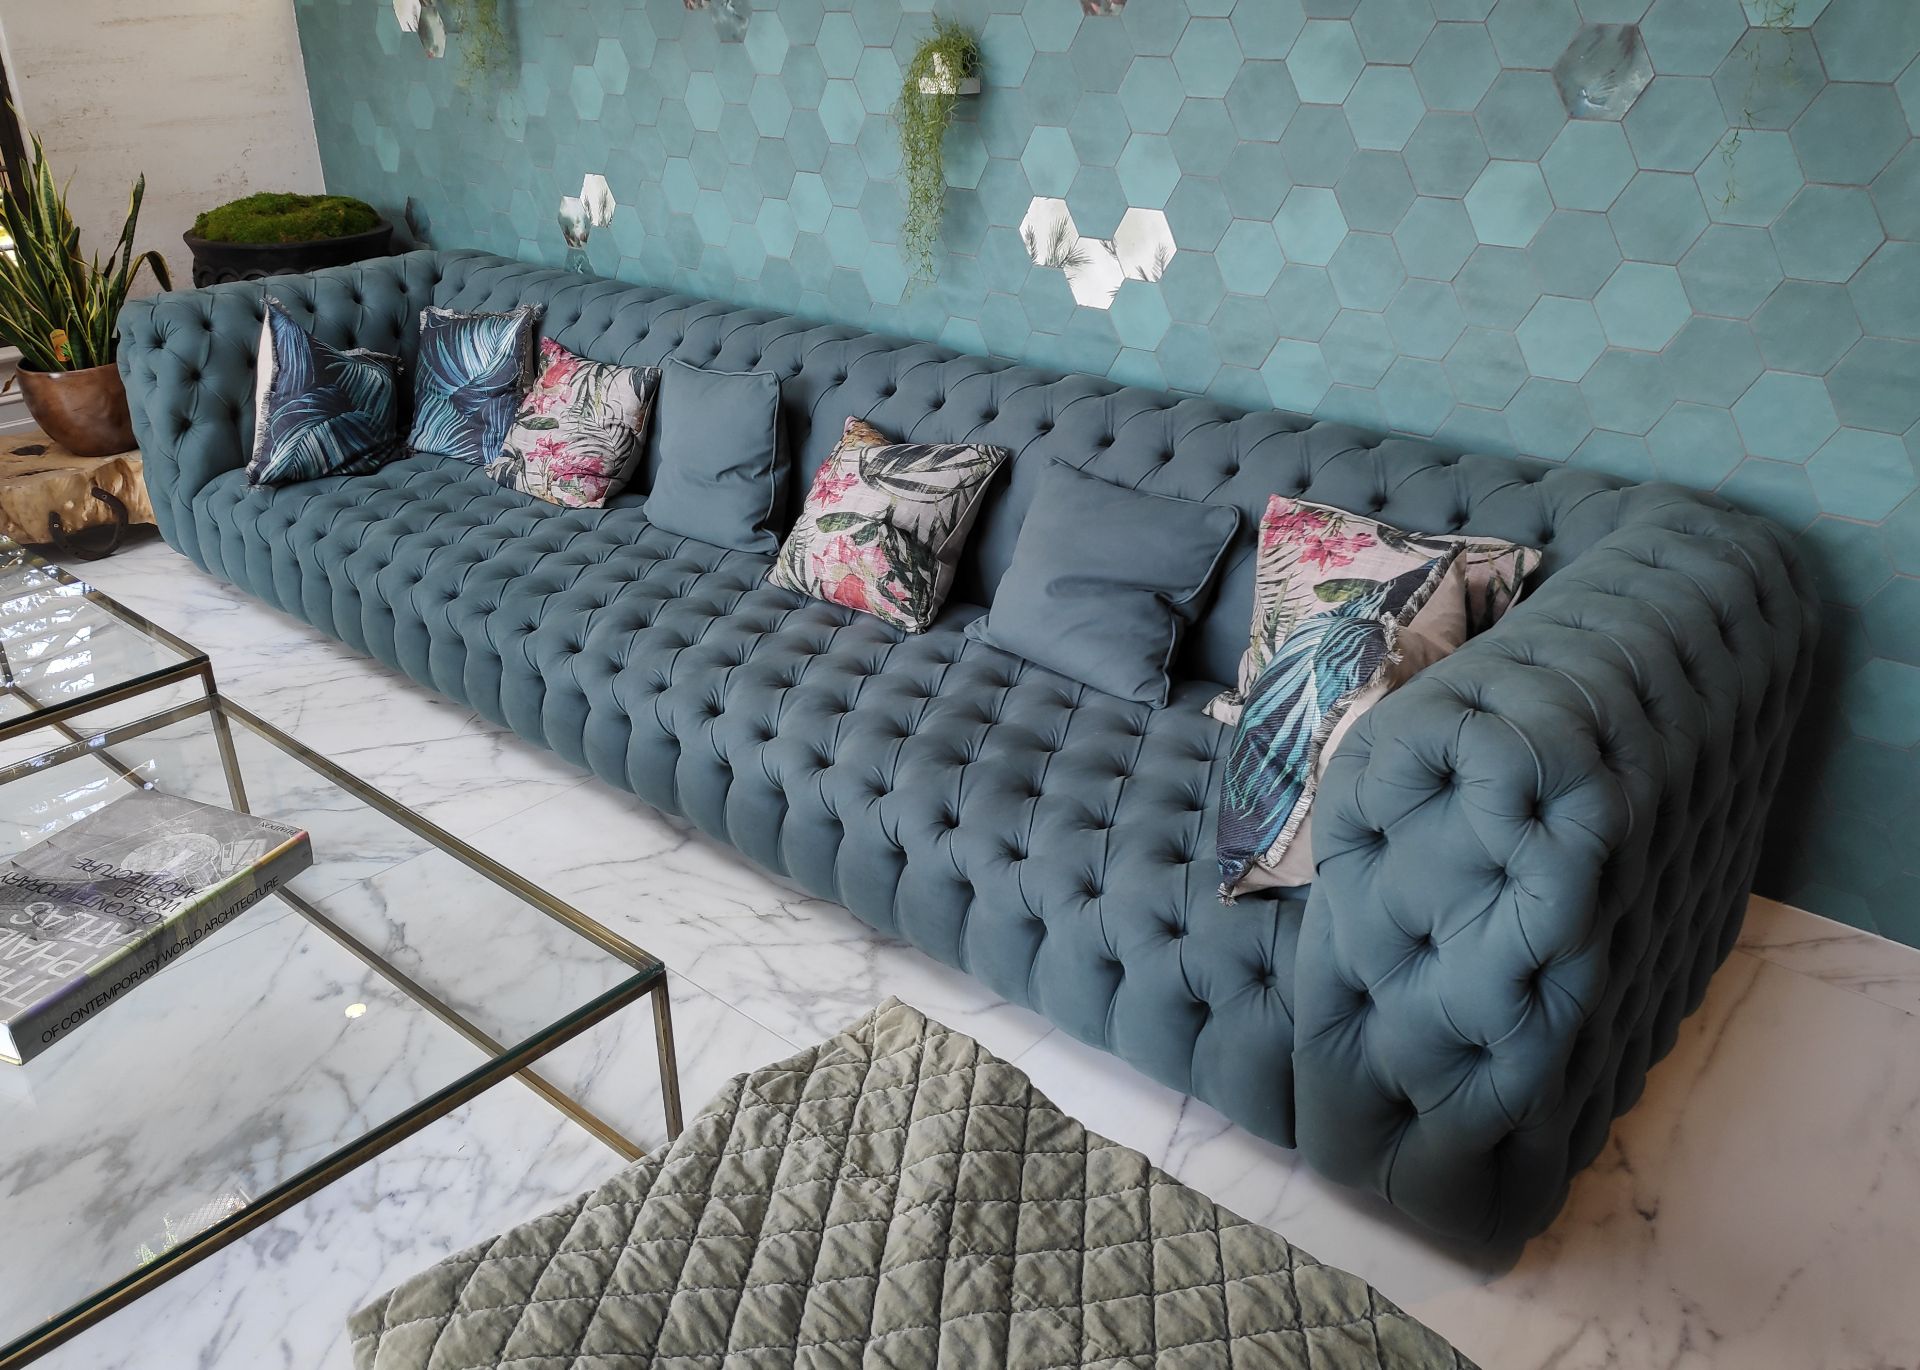 1 x Bespoke 3.8m Baxter-style Chesterfield Sofa in Green - Dimensions: W380 x H77cm - Includes - Image 5 of 7